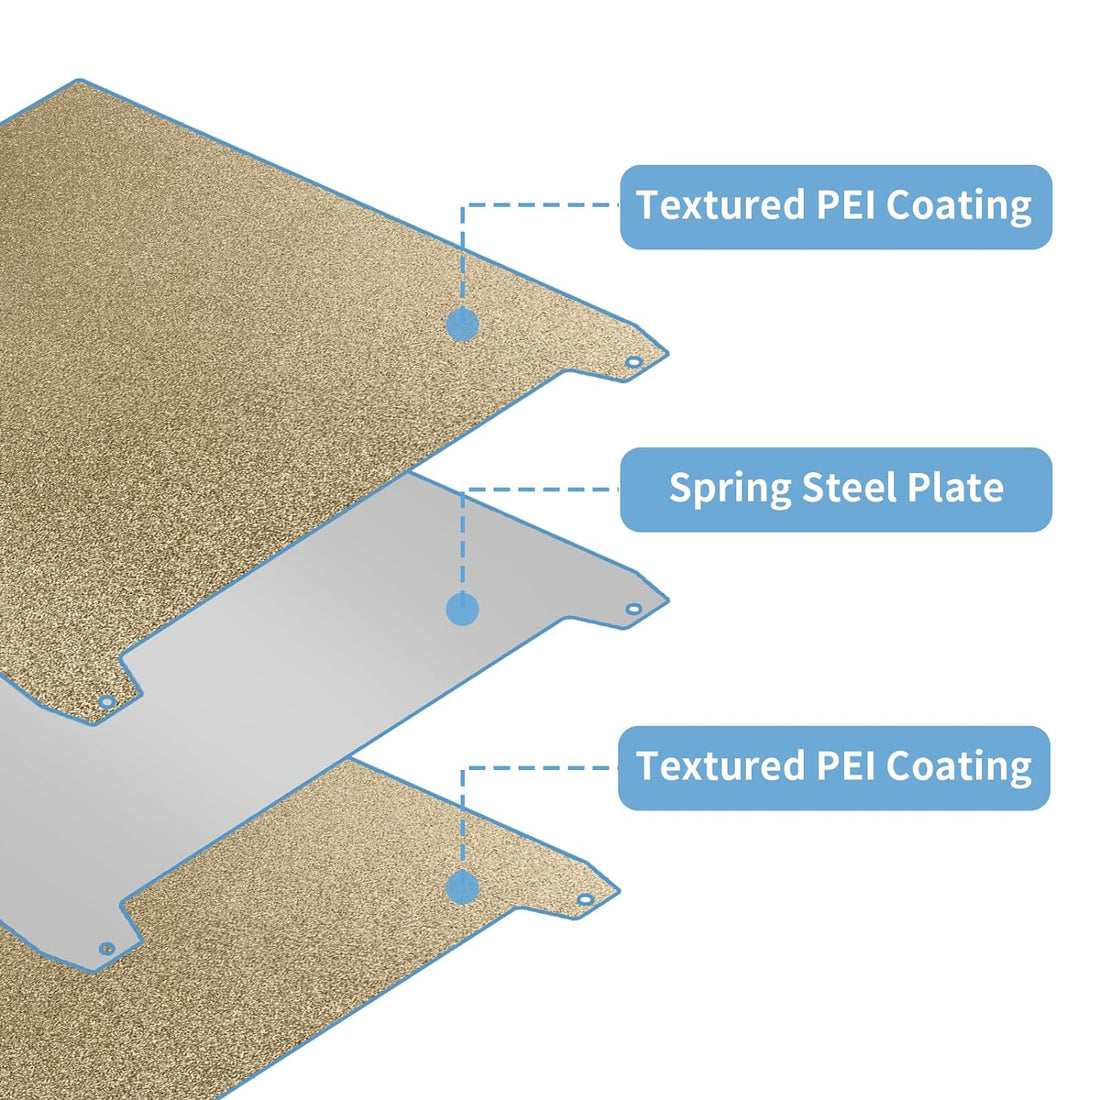 IdeaFormer-3D Double Sided Textured PEI Sheet 235x235mm, Flexible PEI Build Plate Print Bed for Ender 3 S1/Ender 3 V2/Ender 3 Pro/Ender 5/Ender 5 S1/Ender 5 Pro/CP-01/CR-20